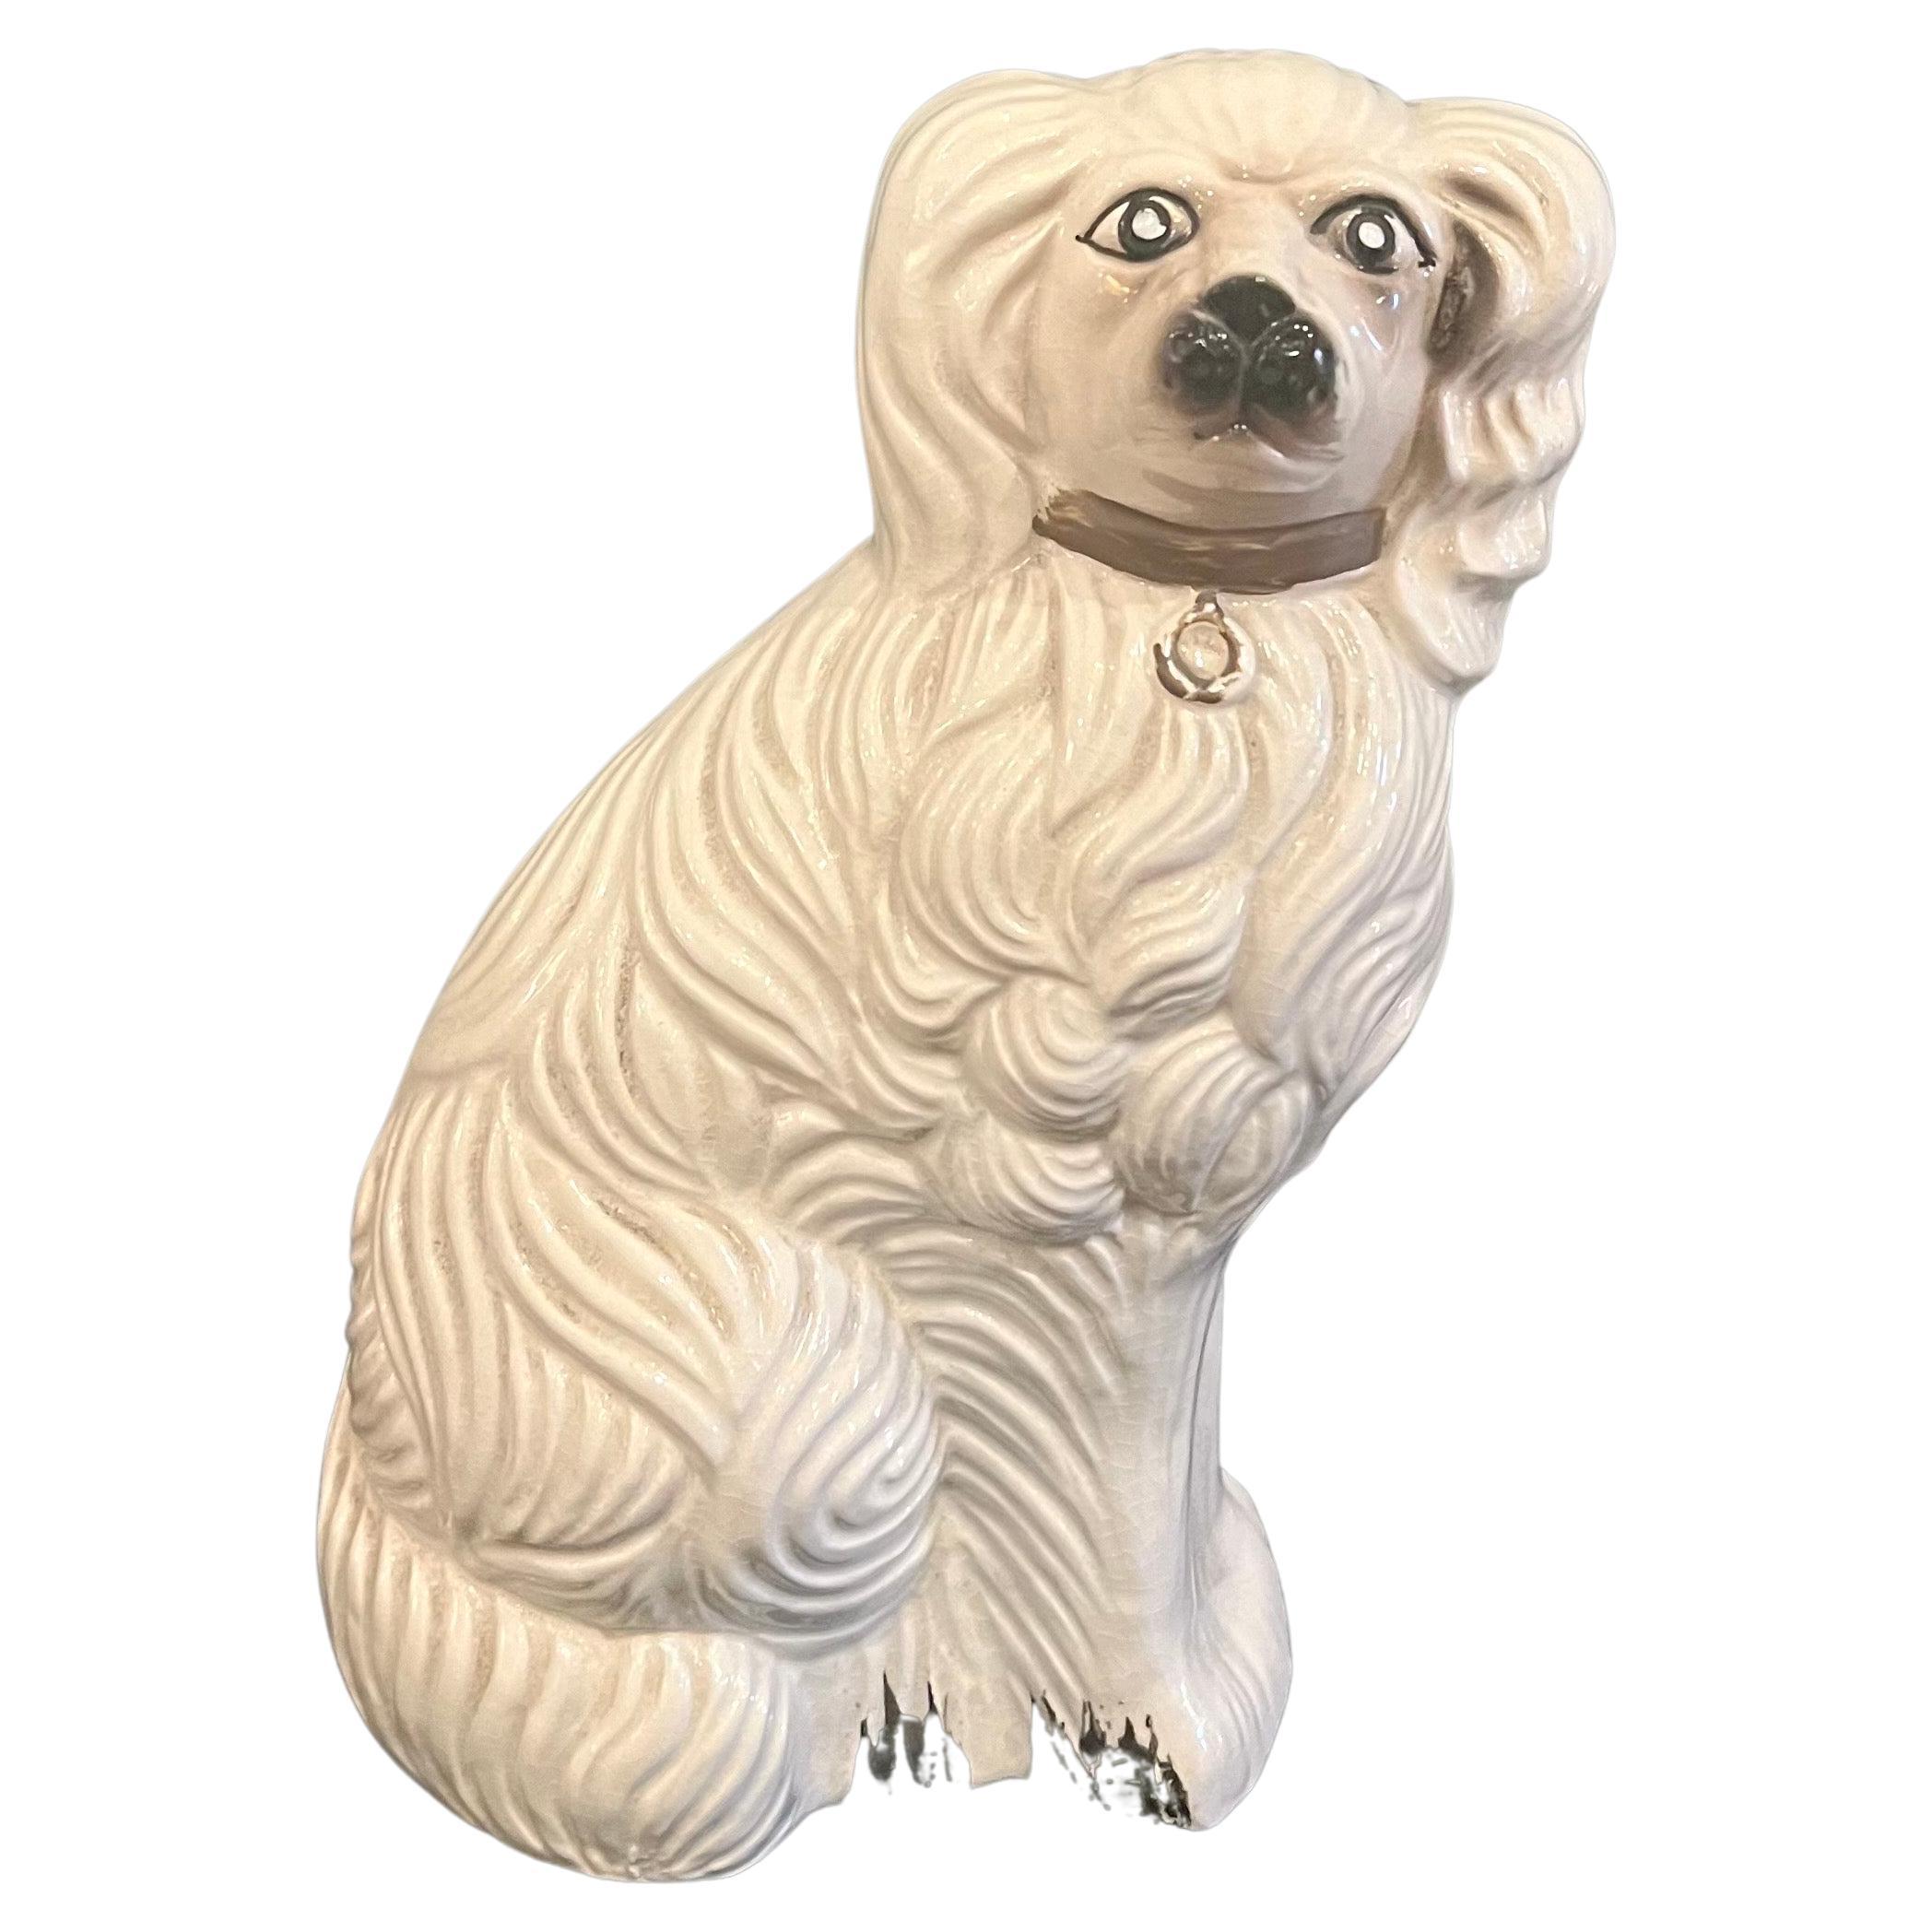 Beautiful spaniel dog ceramic figurine, circa 1950's made in Japan in great condition no chips or cracks.